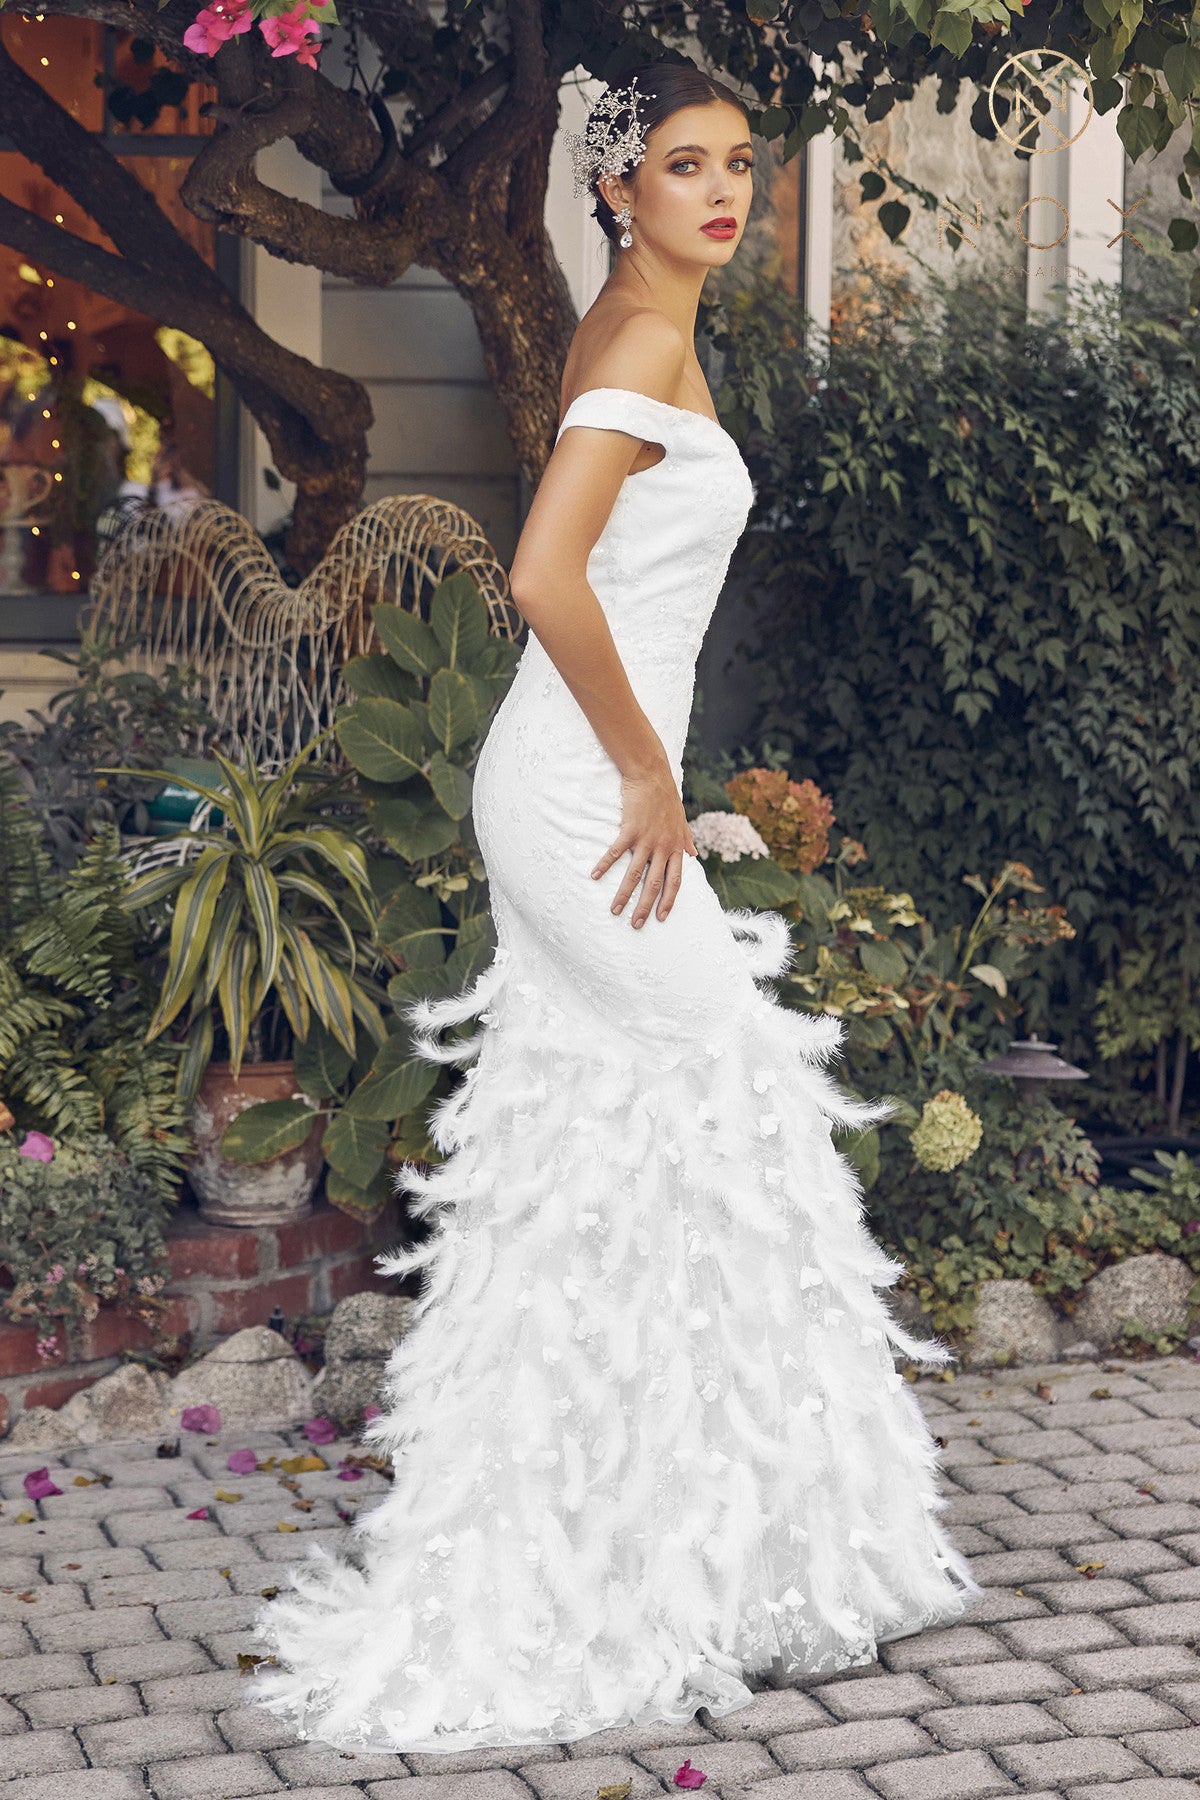 Off-shoulder gown with a fitted silhouette, featuring a stunning beadwork design and feathered accents. The skirt creates a sheath silhouette that flows to the full-length hem.